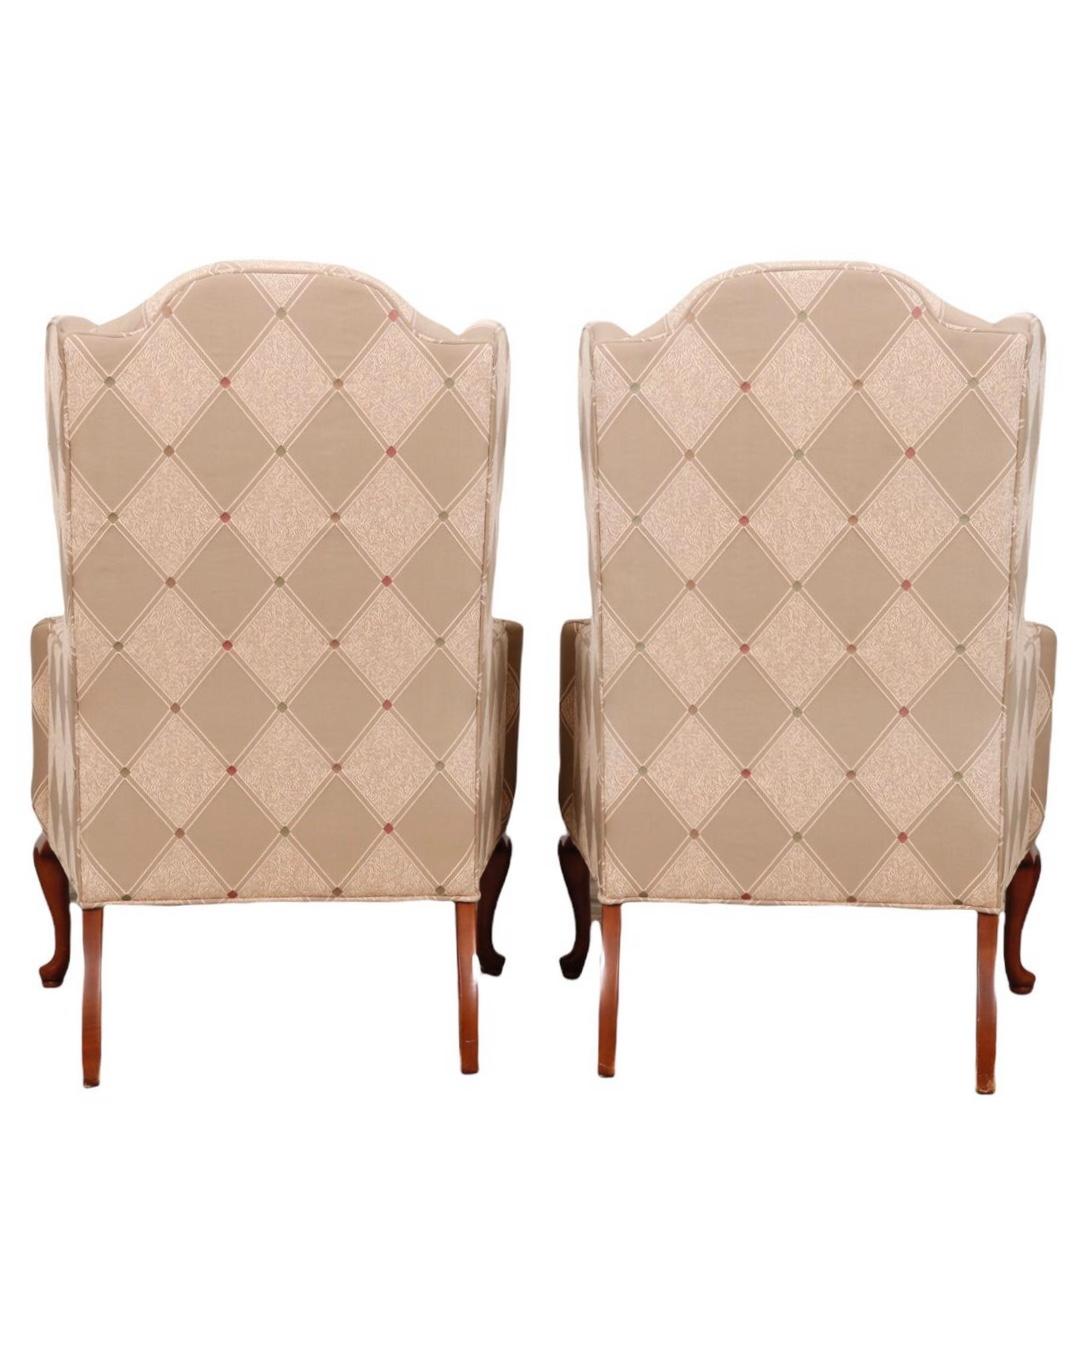 Queen Anne Style Wingback Chairs - a Pair In Good Condition For Sale In Bradenton, FL